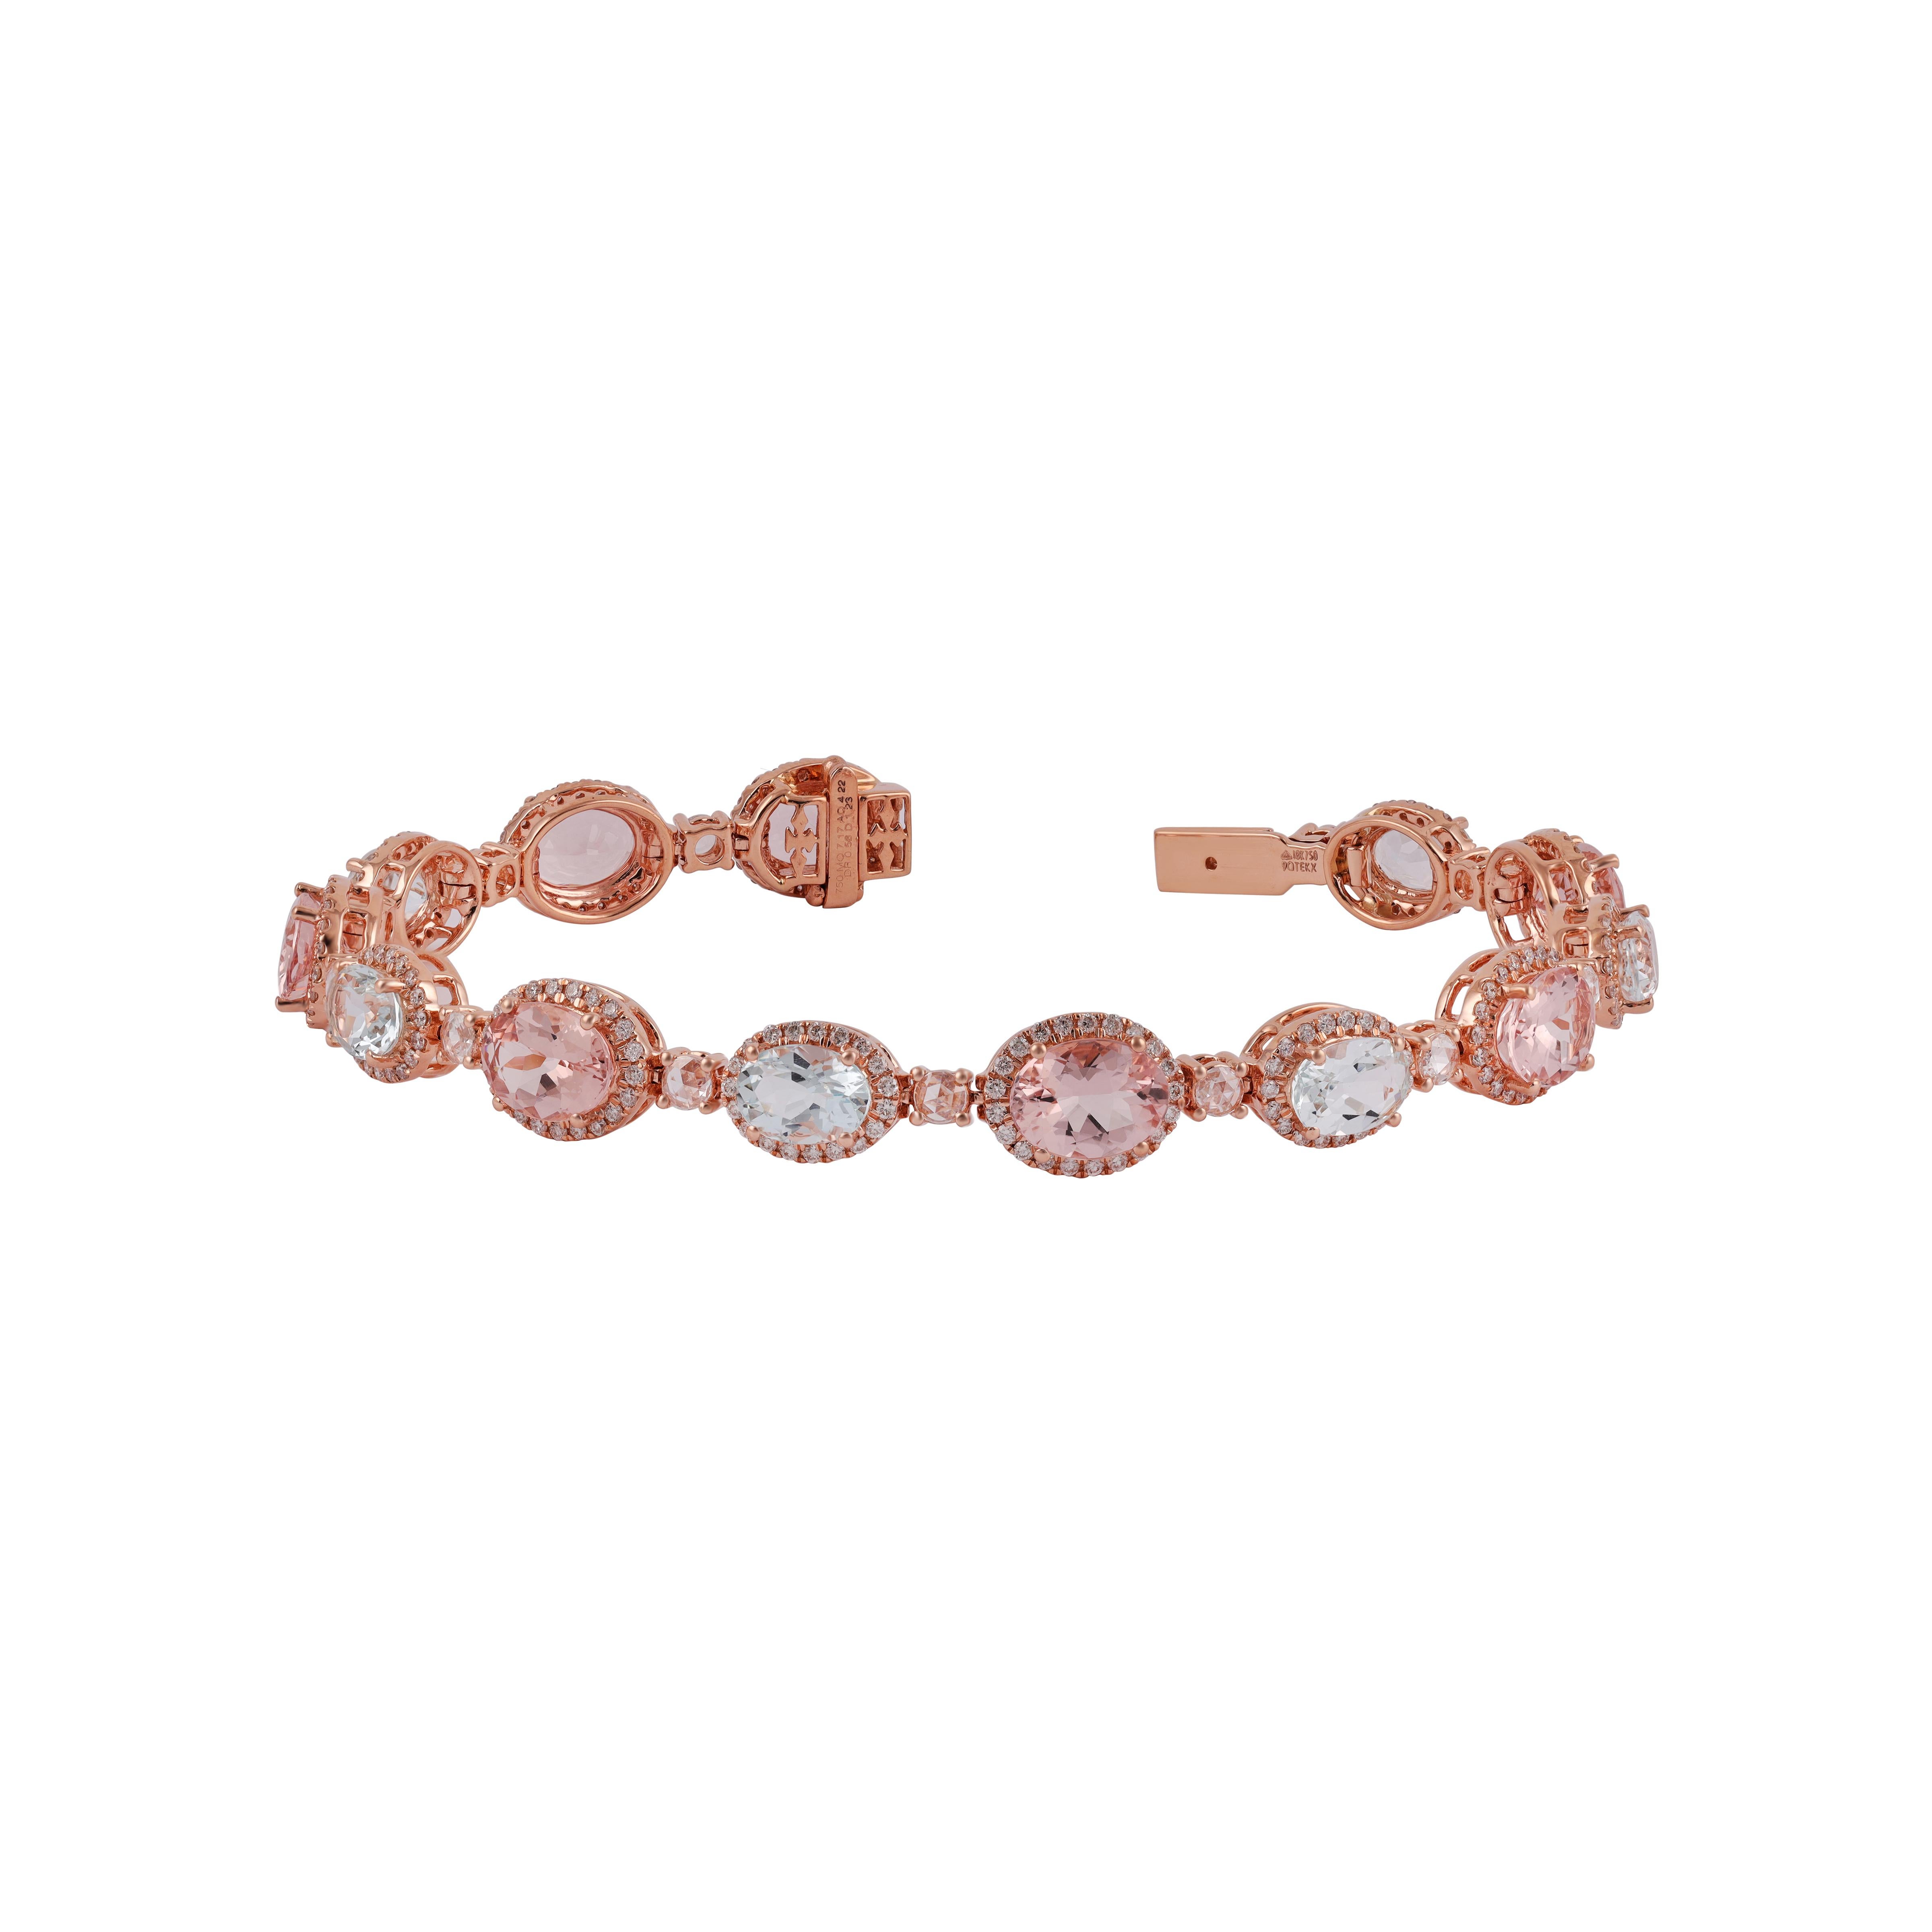 This timelessly elegant bracelet by Gem Plaza . Stern features 13 oval shaped aquamarines & Morganite of high clarity and vibrant luster. Their total weight is approximately 11.39 carats. Each aquamarine & Morganite is accented by rose cut Diamond &